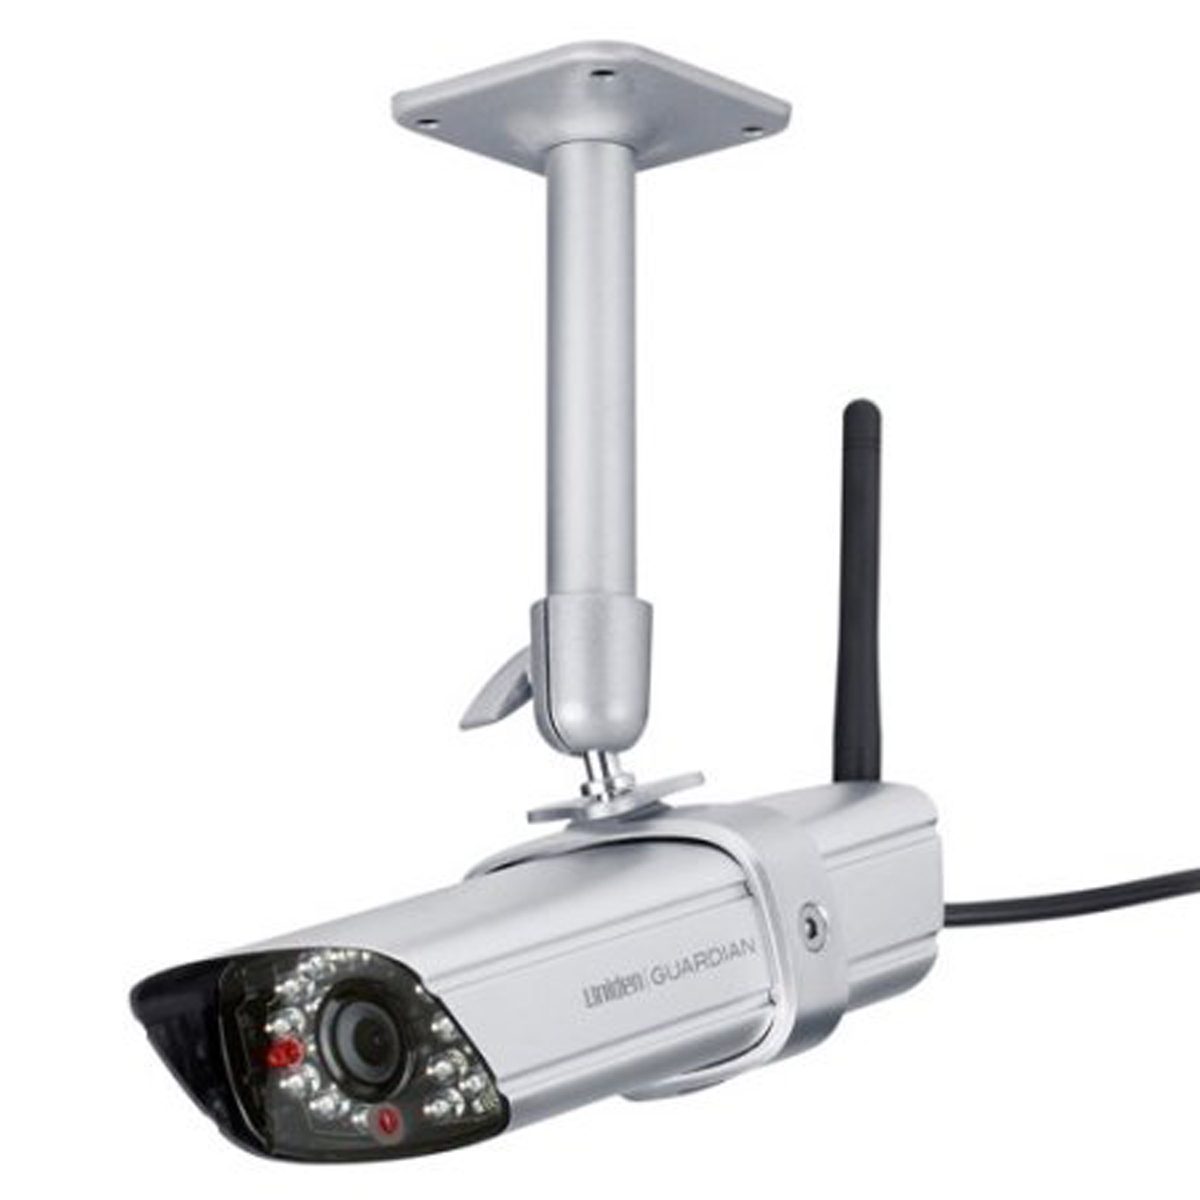 <p>Older <a href="https://www.familyhandyman.com/project/how-to-install-outdoor-surveillance-cameras/">outdoor security cameras</a> had terrible video quality and even worse night video quality. Advanced features like IR cut filters and the ability to communicate with those in the picture? Forget it. The <a href="https://www.amazon.com/UNDGC45-Guardian-Outdoor-Weatherproof-Camera/dp/B008GULDD4/?tag=fhm_msn-20" rel="nofollow noopener noreferrer">Uniden GC45S</a> off that and the ability to transmit data up to 500 feet.</p> <p>Photo: Courtesy of <a href="https://www.uniden.com/ProductImages/615f13e3-0dad-4250-b8a8-fac43f747f72/images/prev_GC45S.jpg" rel="nofollow noopener noreferrer">Uniden</a></p>